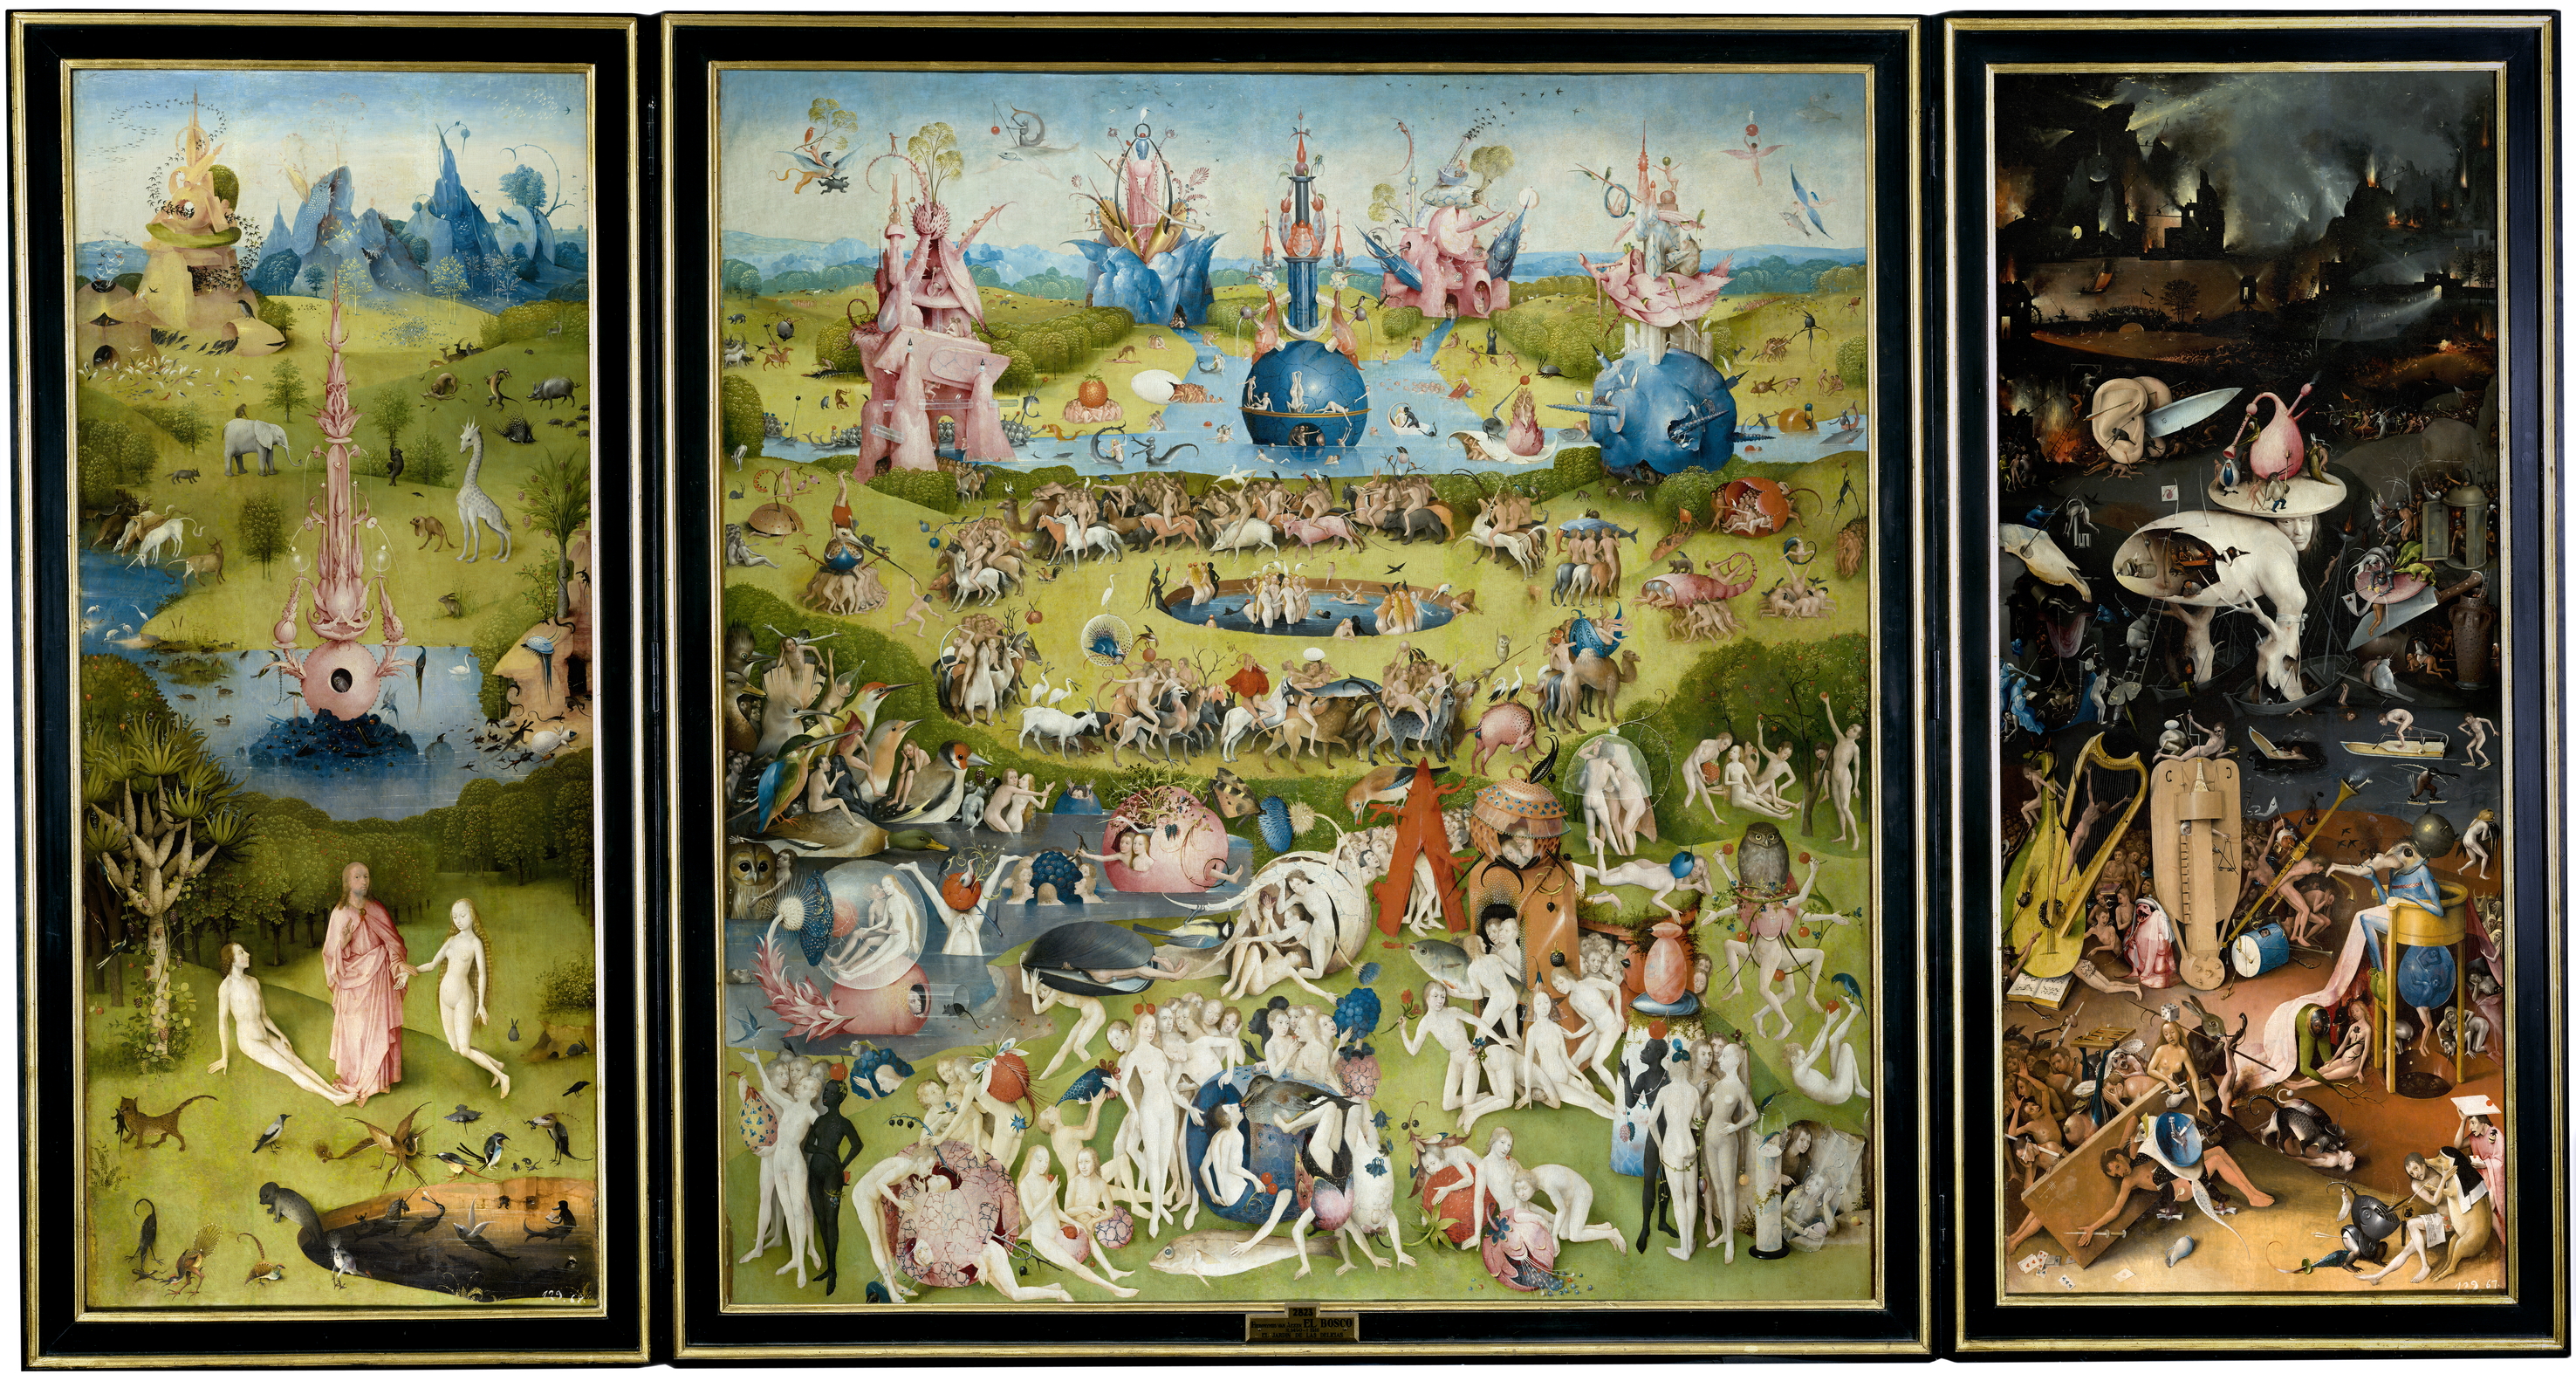 "The Garden of Earthly Delights," by Hieronymus Bosch.